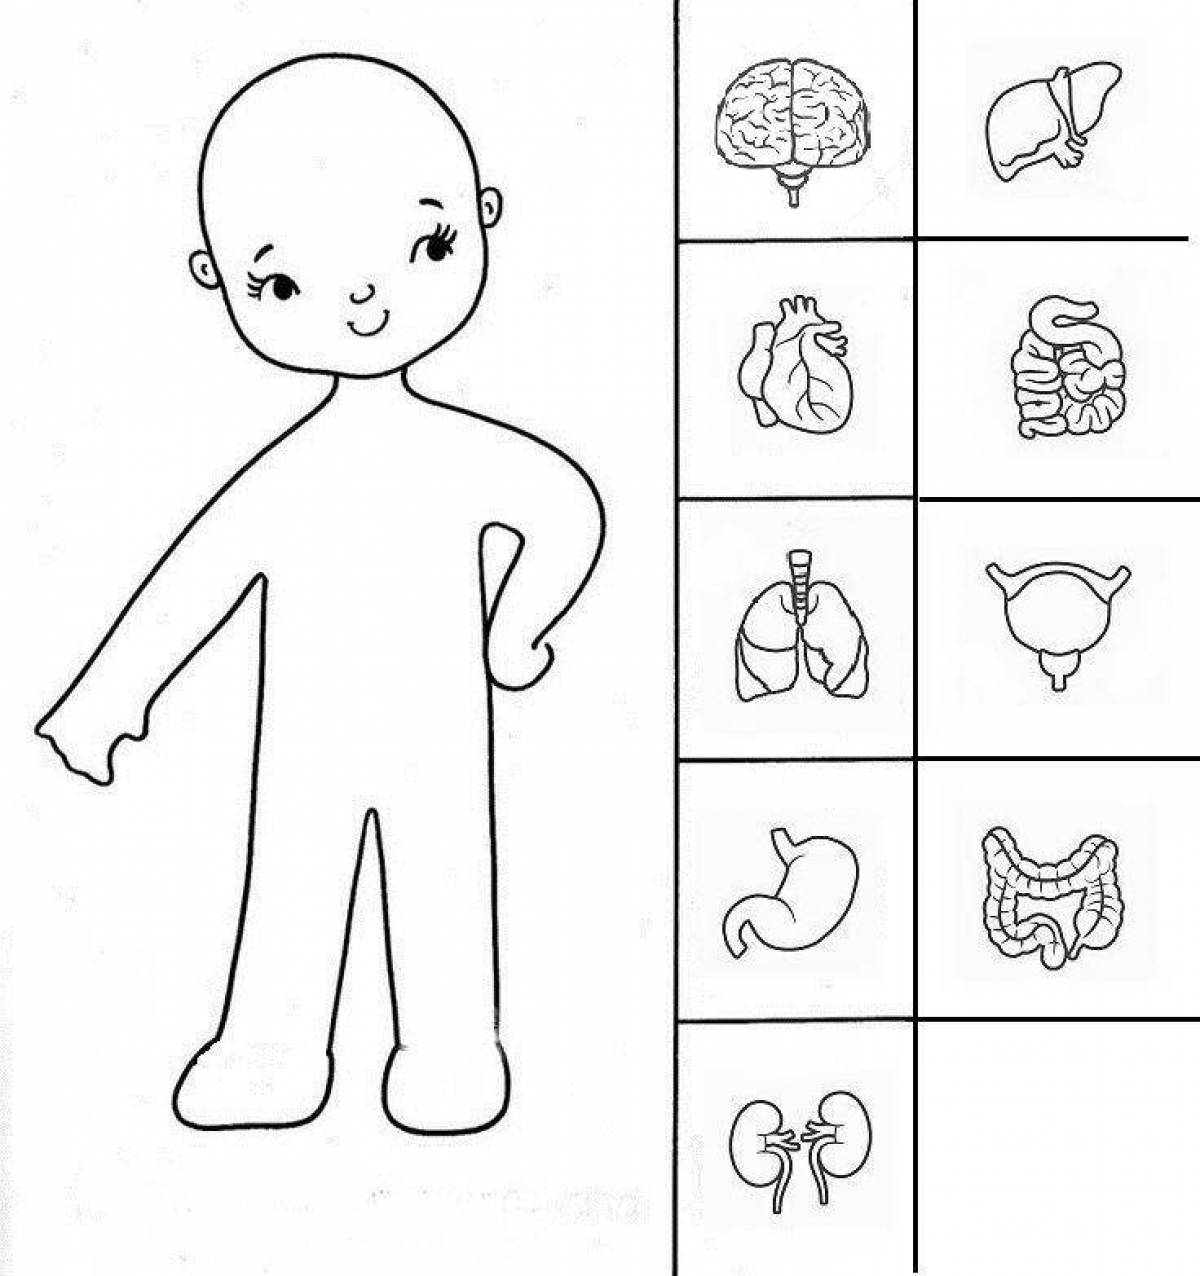 Human body parts for children #1